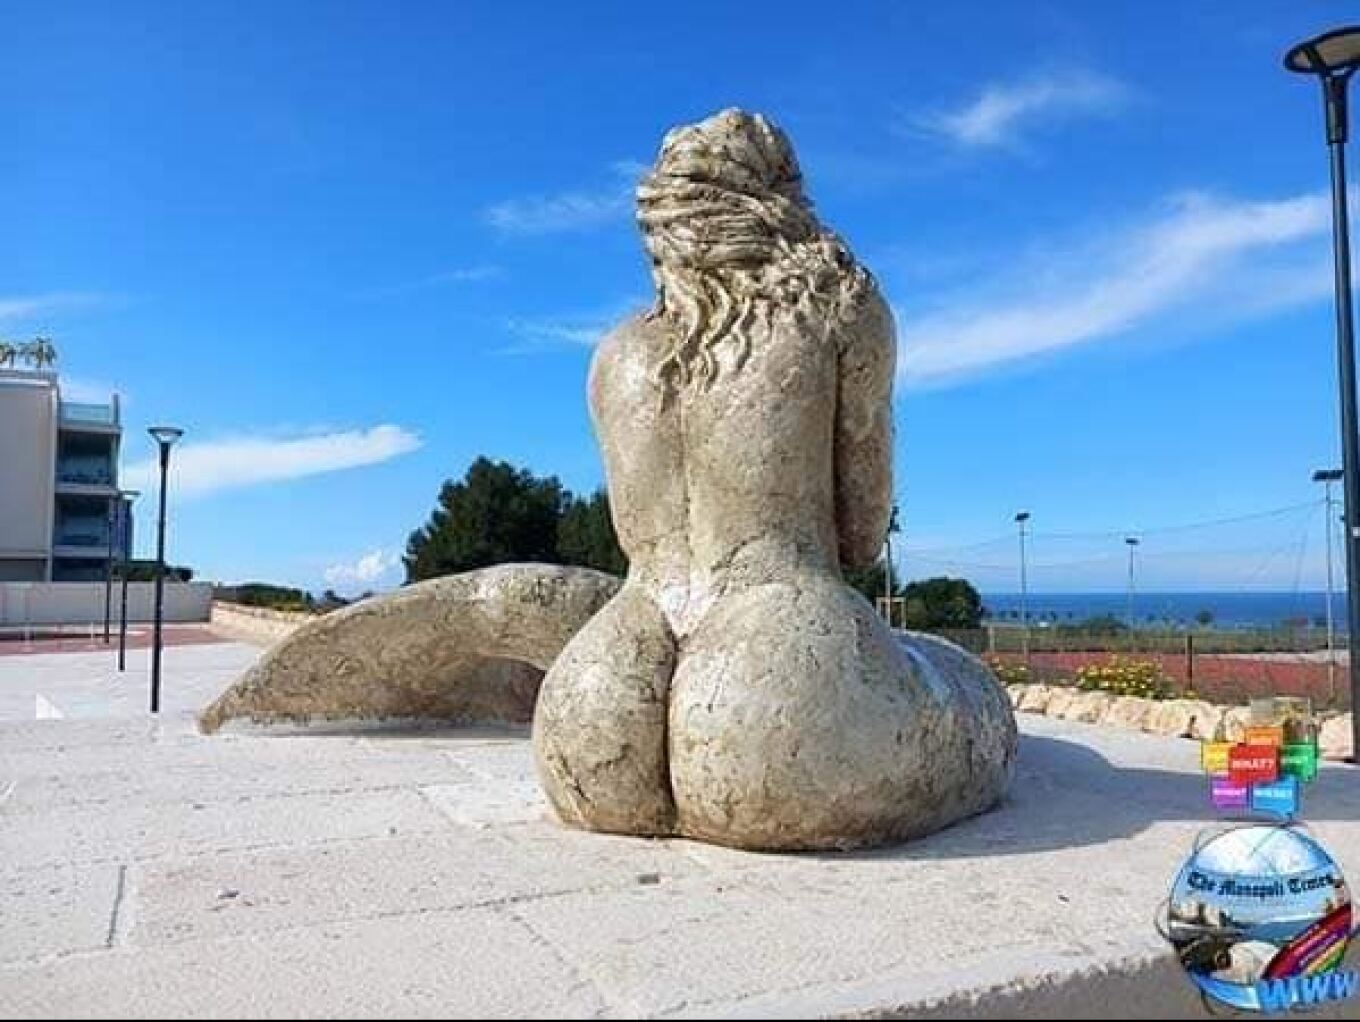 A $384,000 Statue of a Decidedly Curvy Mermaid in Southern Italy Has Sparked Controversy Online pic